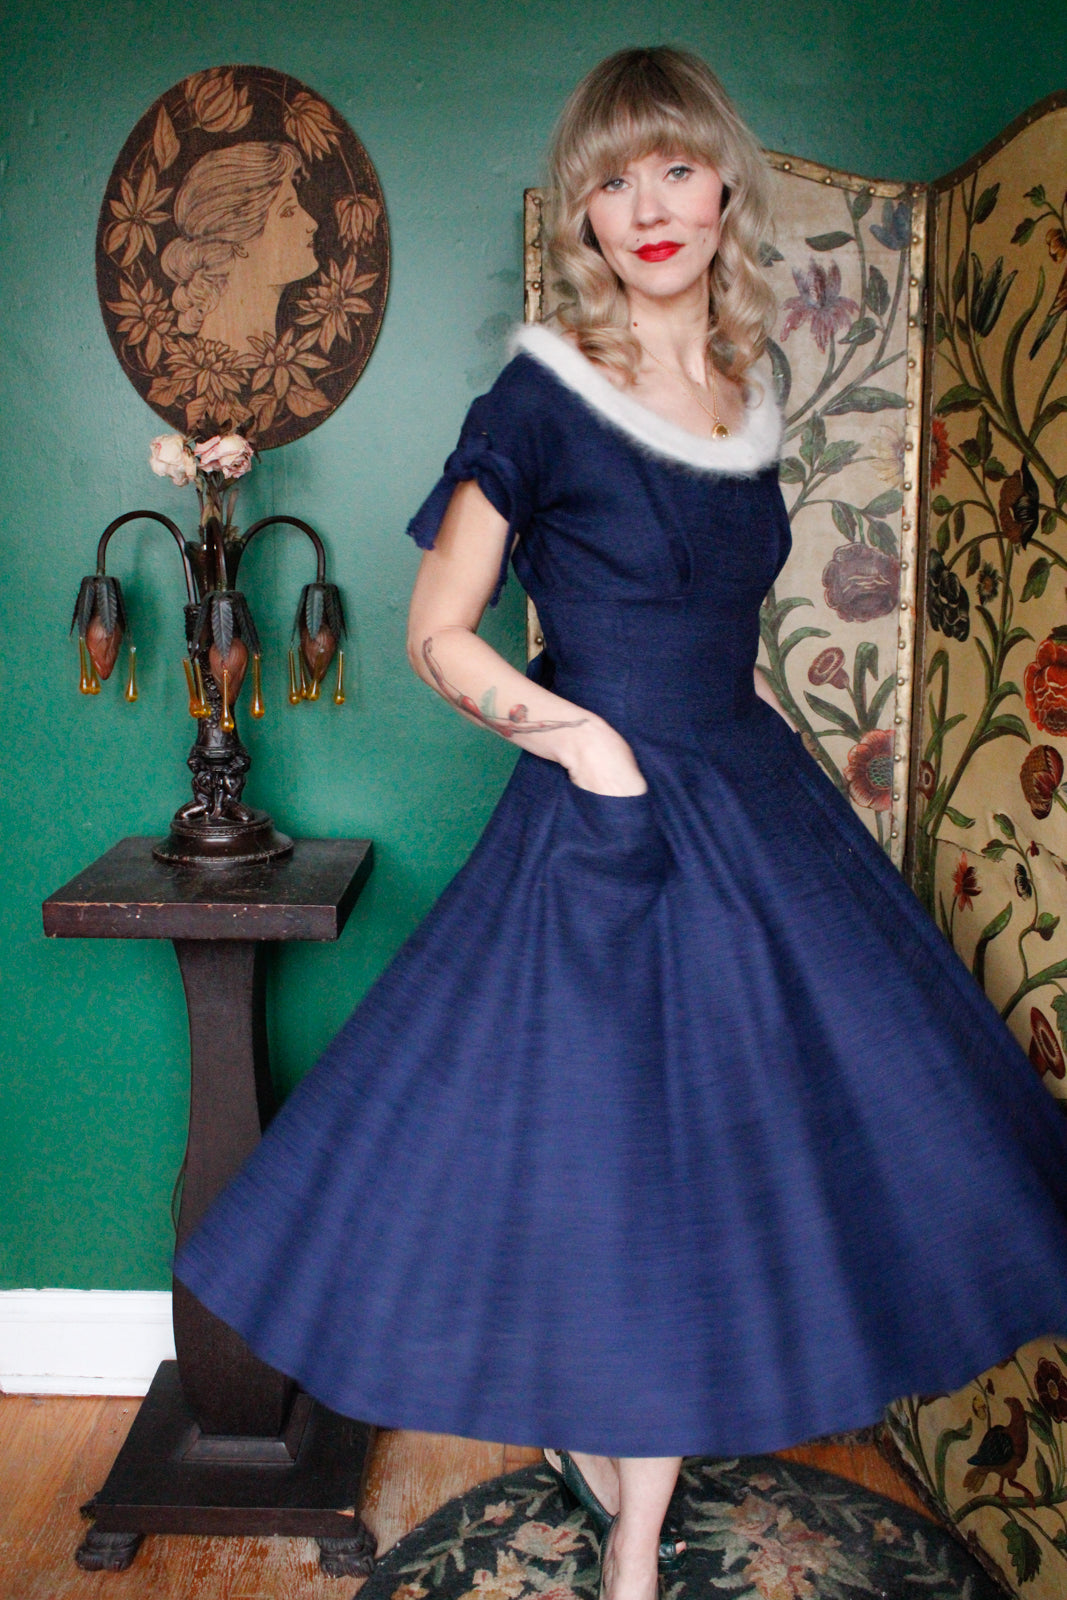 1950s Sapphire Blue Swing Dress with Mohair